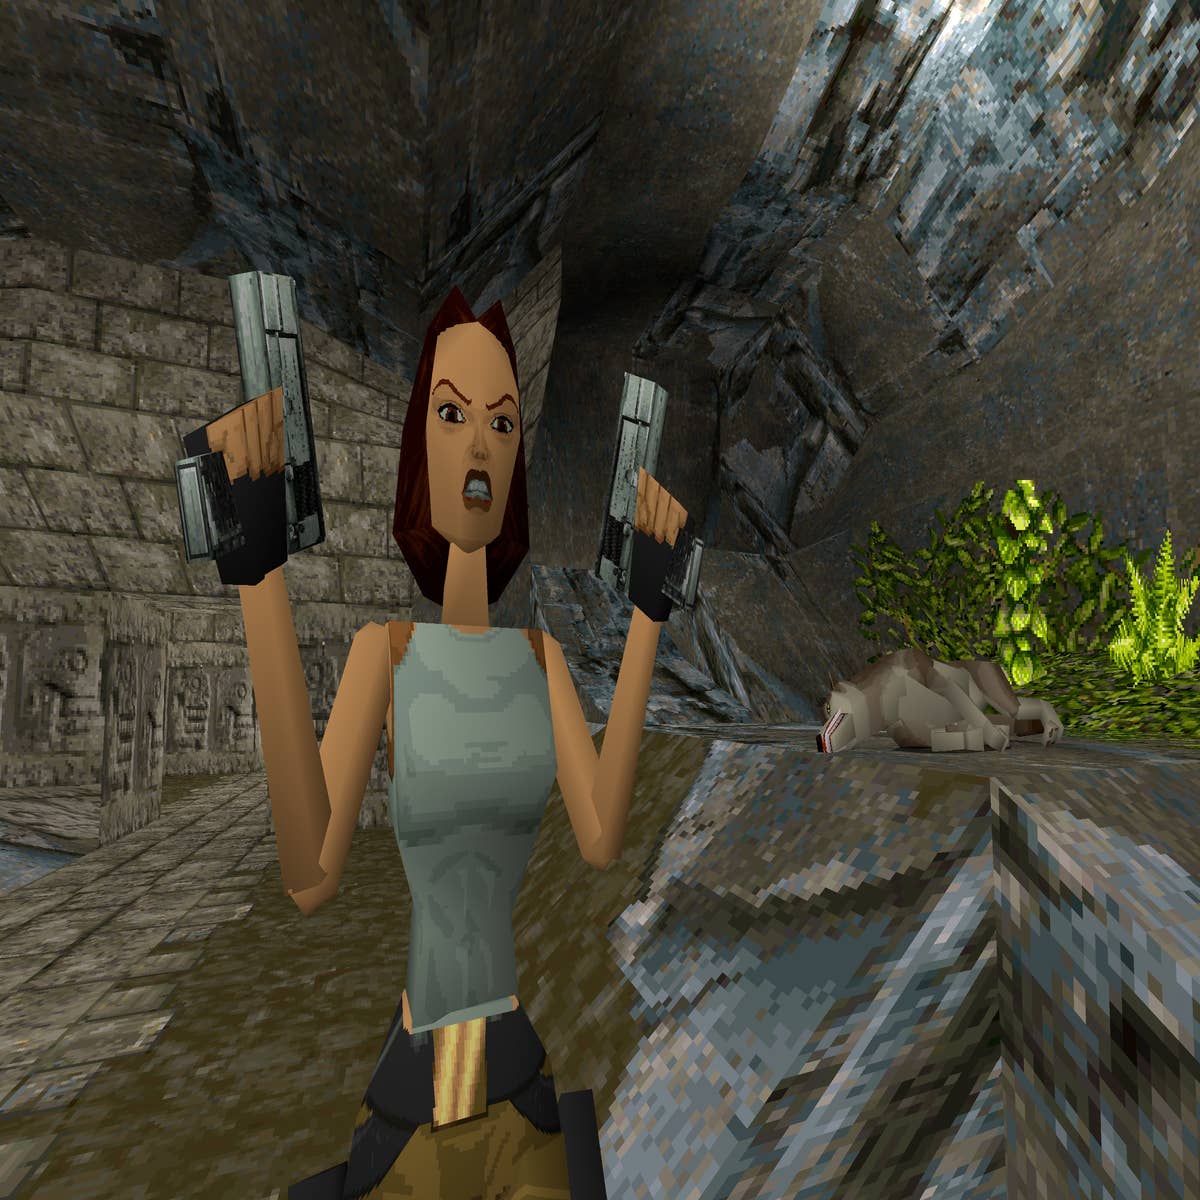 Lara Croft: Tomb Raider is getting a new game on top of her live